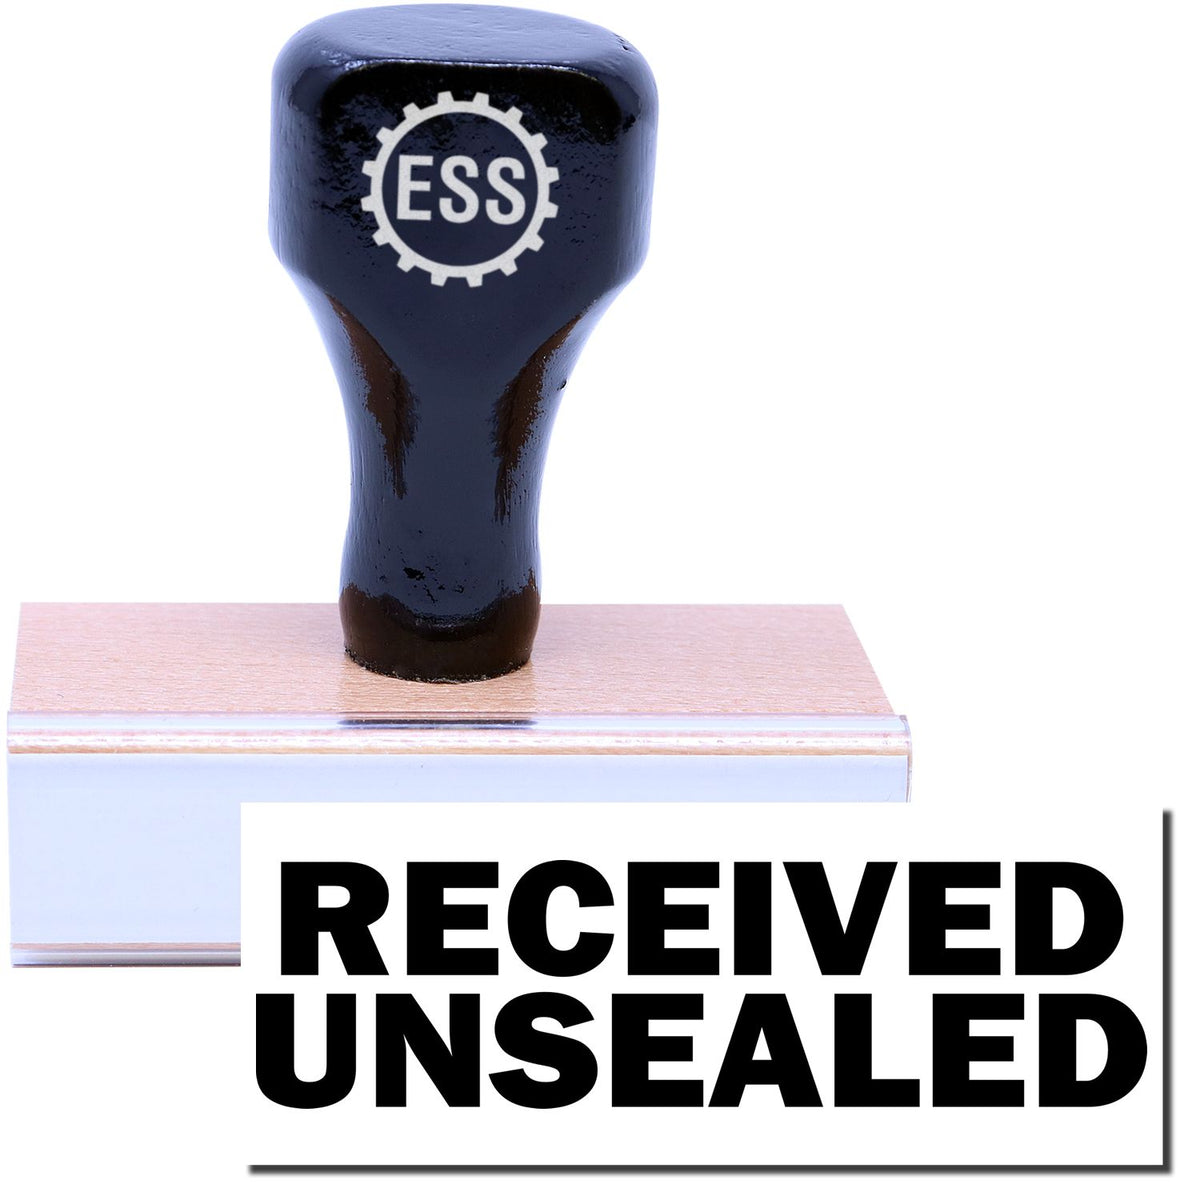 A stock office rubber stamp with a stamped image showing how the text &quot;RECEIVED UNSEALED&quot; in a large font is displayed after stamping.